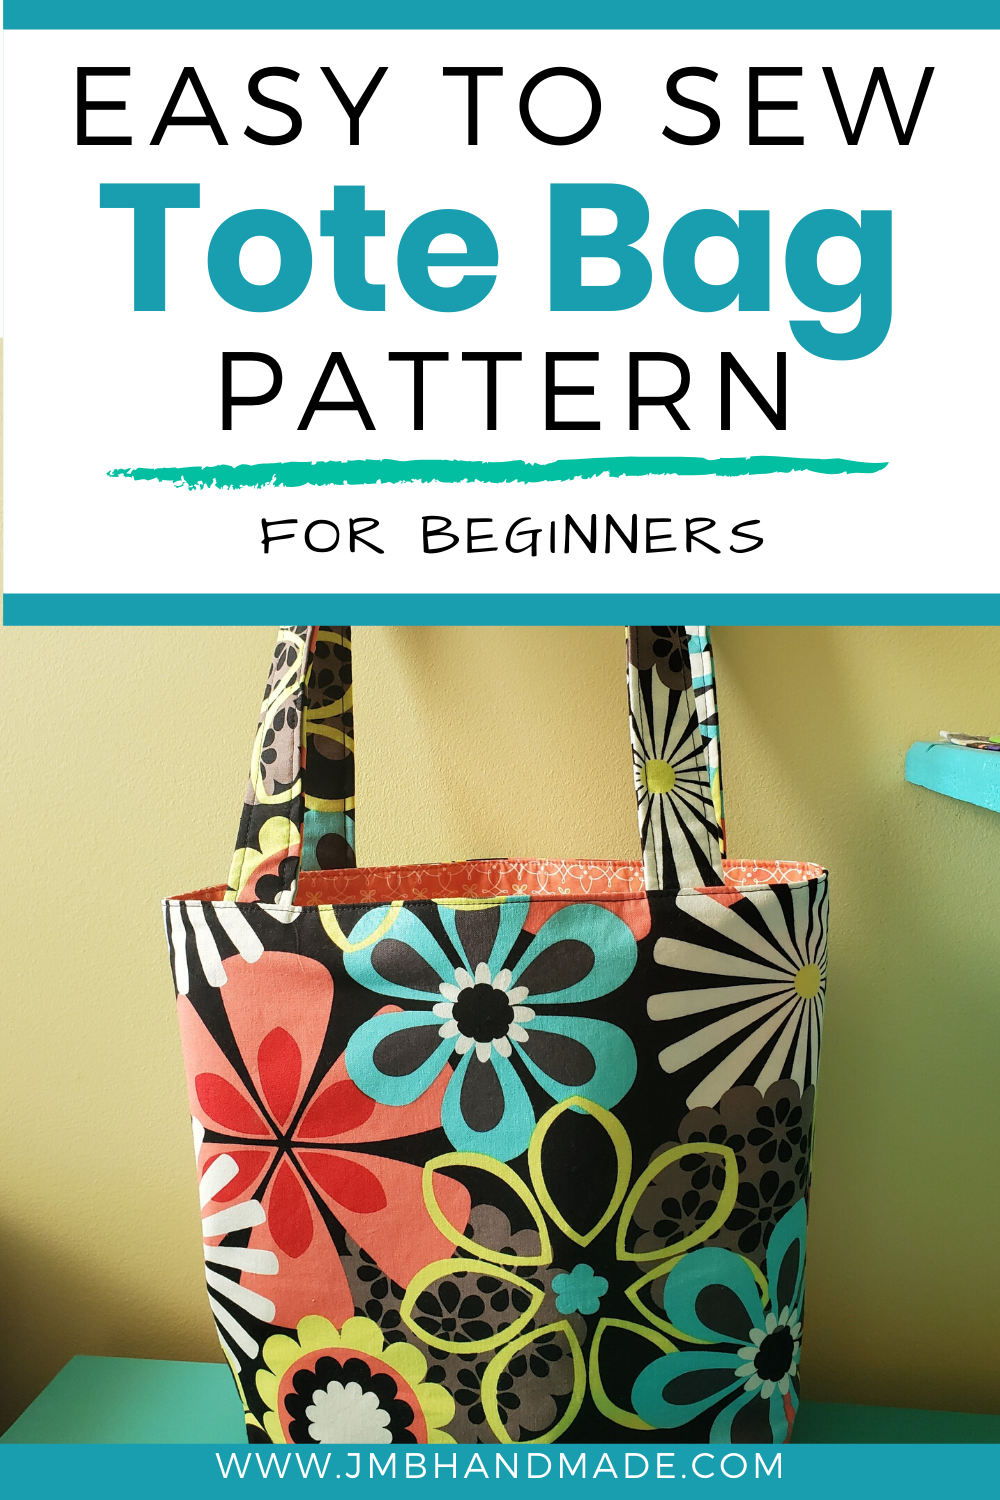 Easy to Sew Tote Bag Pattern - Easy to Sew Tote Bag Pattern -   18 diy Bag simple ideas